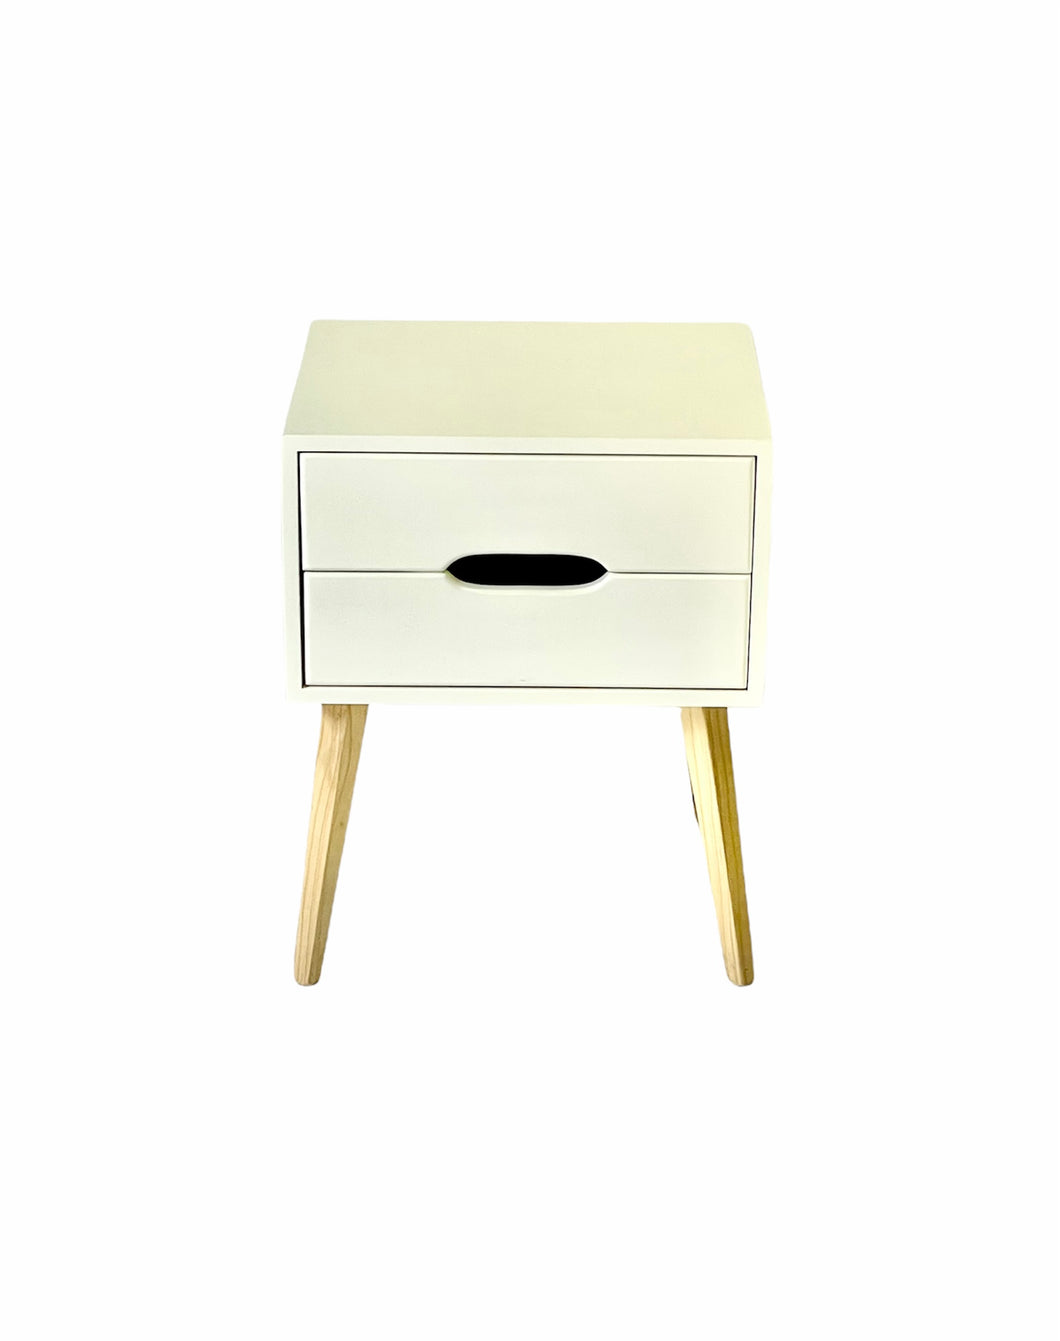 Secaleni IV Two Drawer Side Table